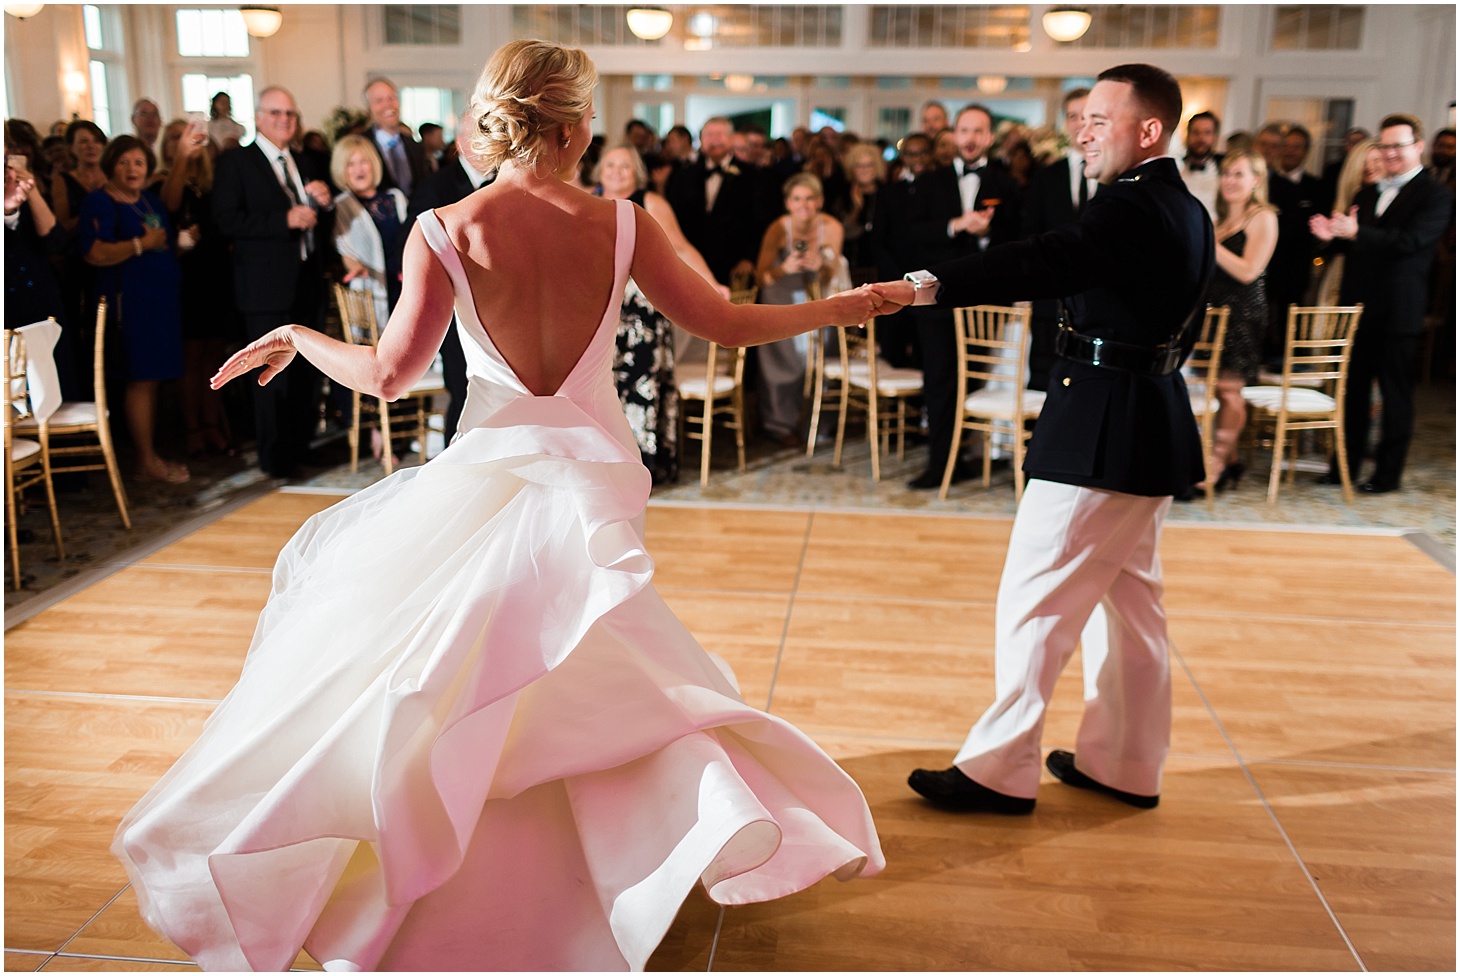 First Dance at Gibson Island Club Wedding Reception in Annapolis, MD | Southern Magnolia Wedding at the Naval Academy and Gibson Island Club | Sarah Bradshaw Photography